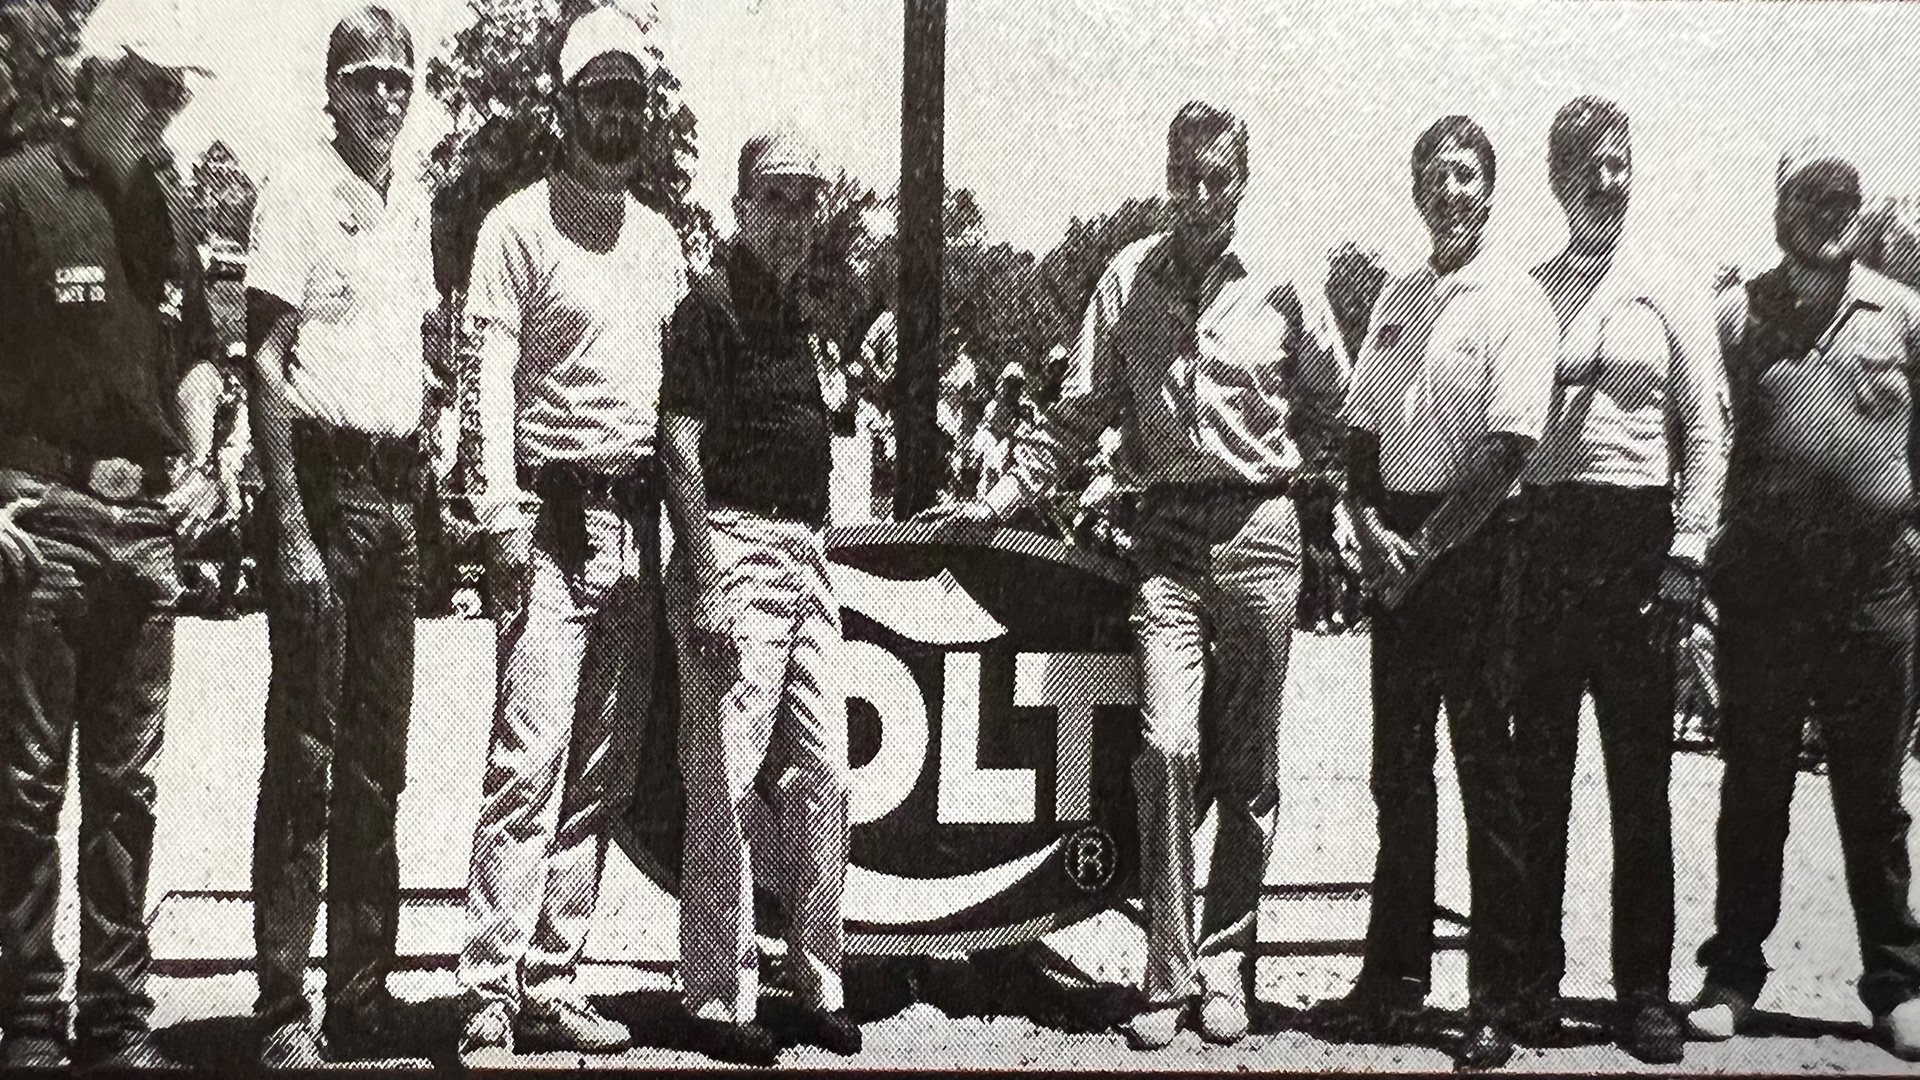 Bianchi Cup champs in 1989